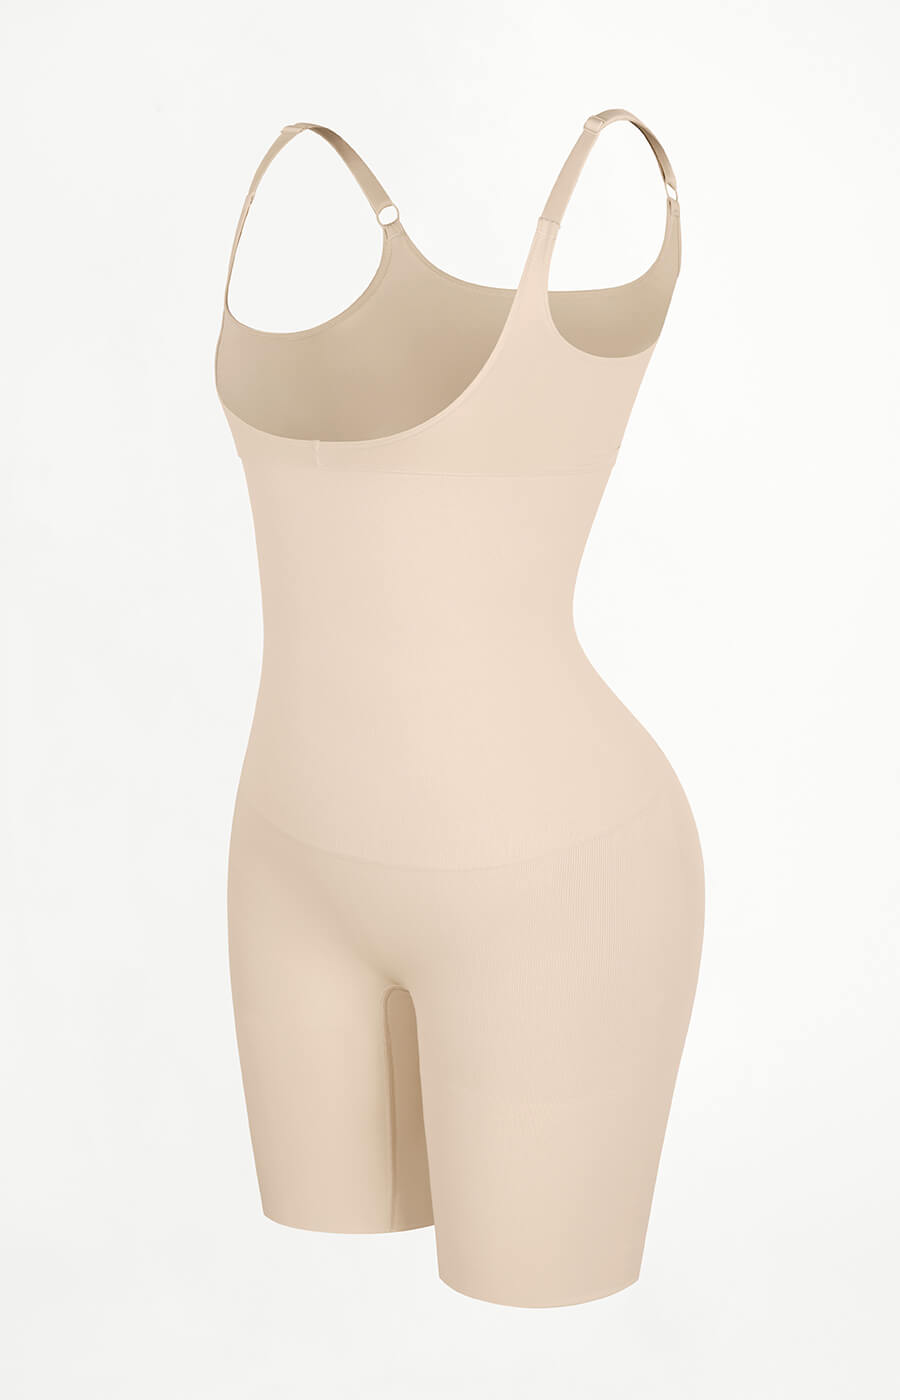 PowerConceal™ Open Bust Seamless Smoothing Body Shaper